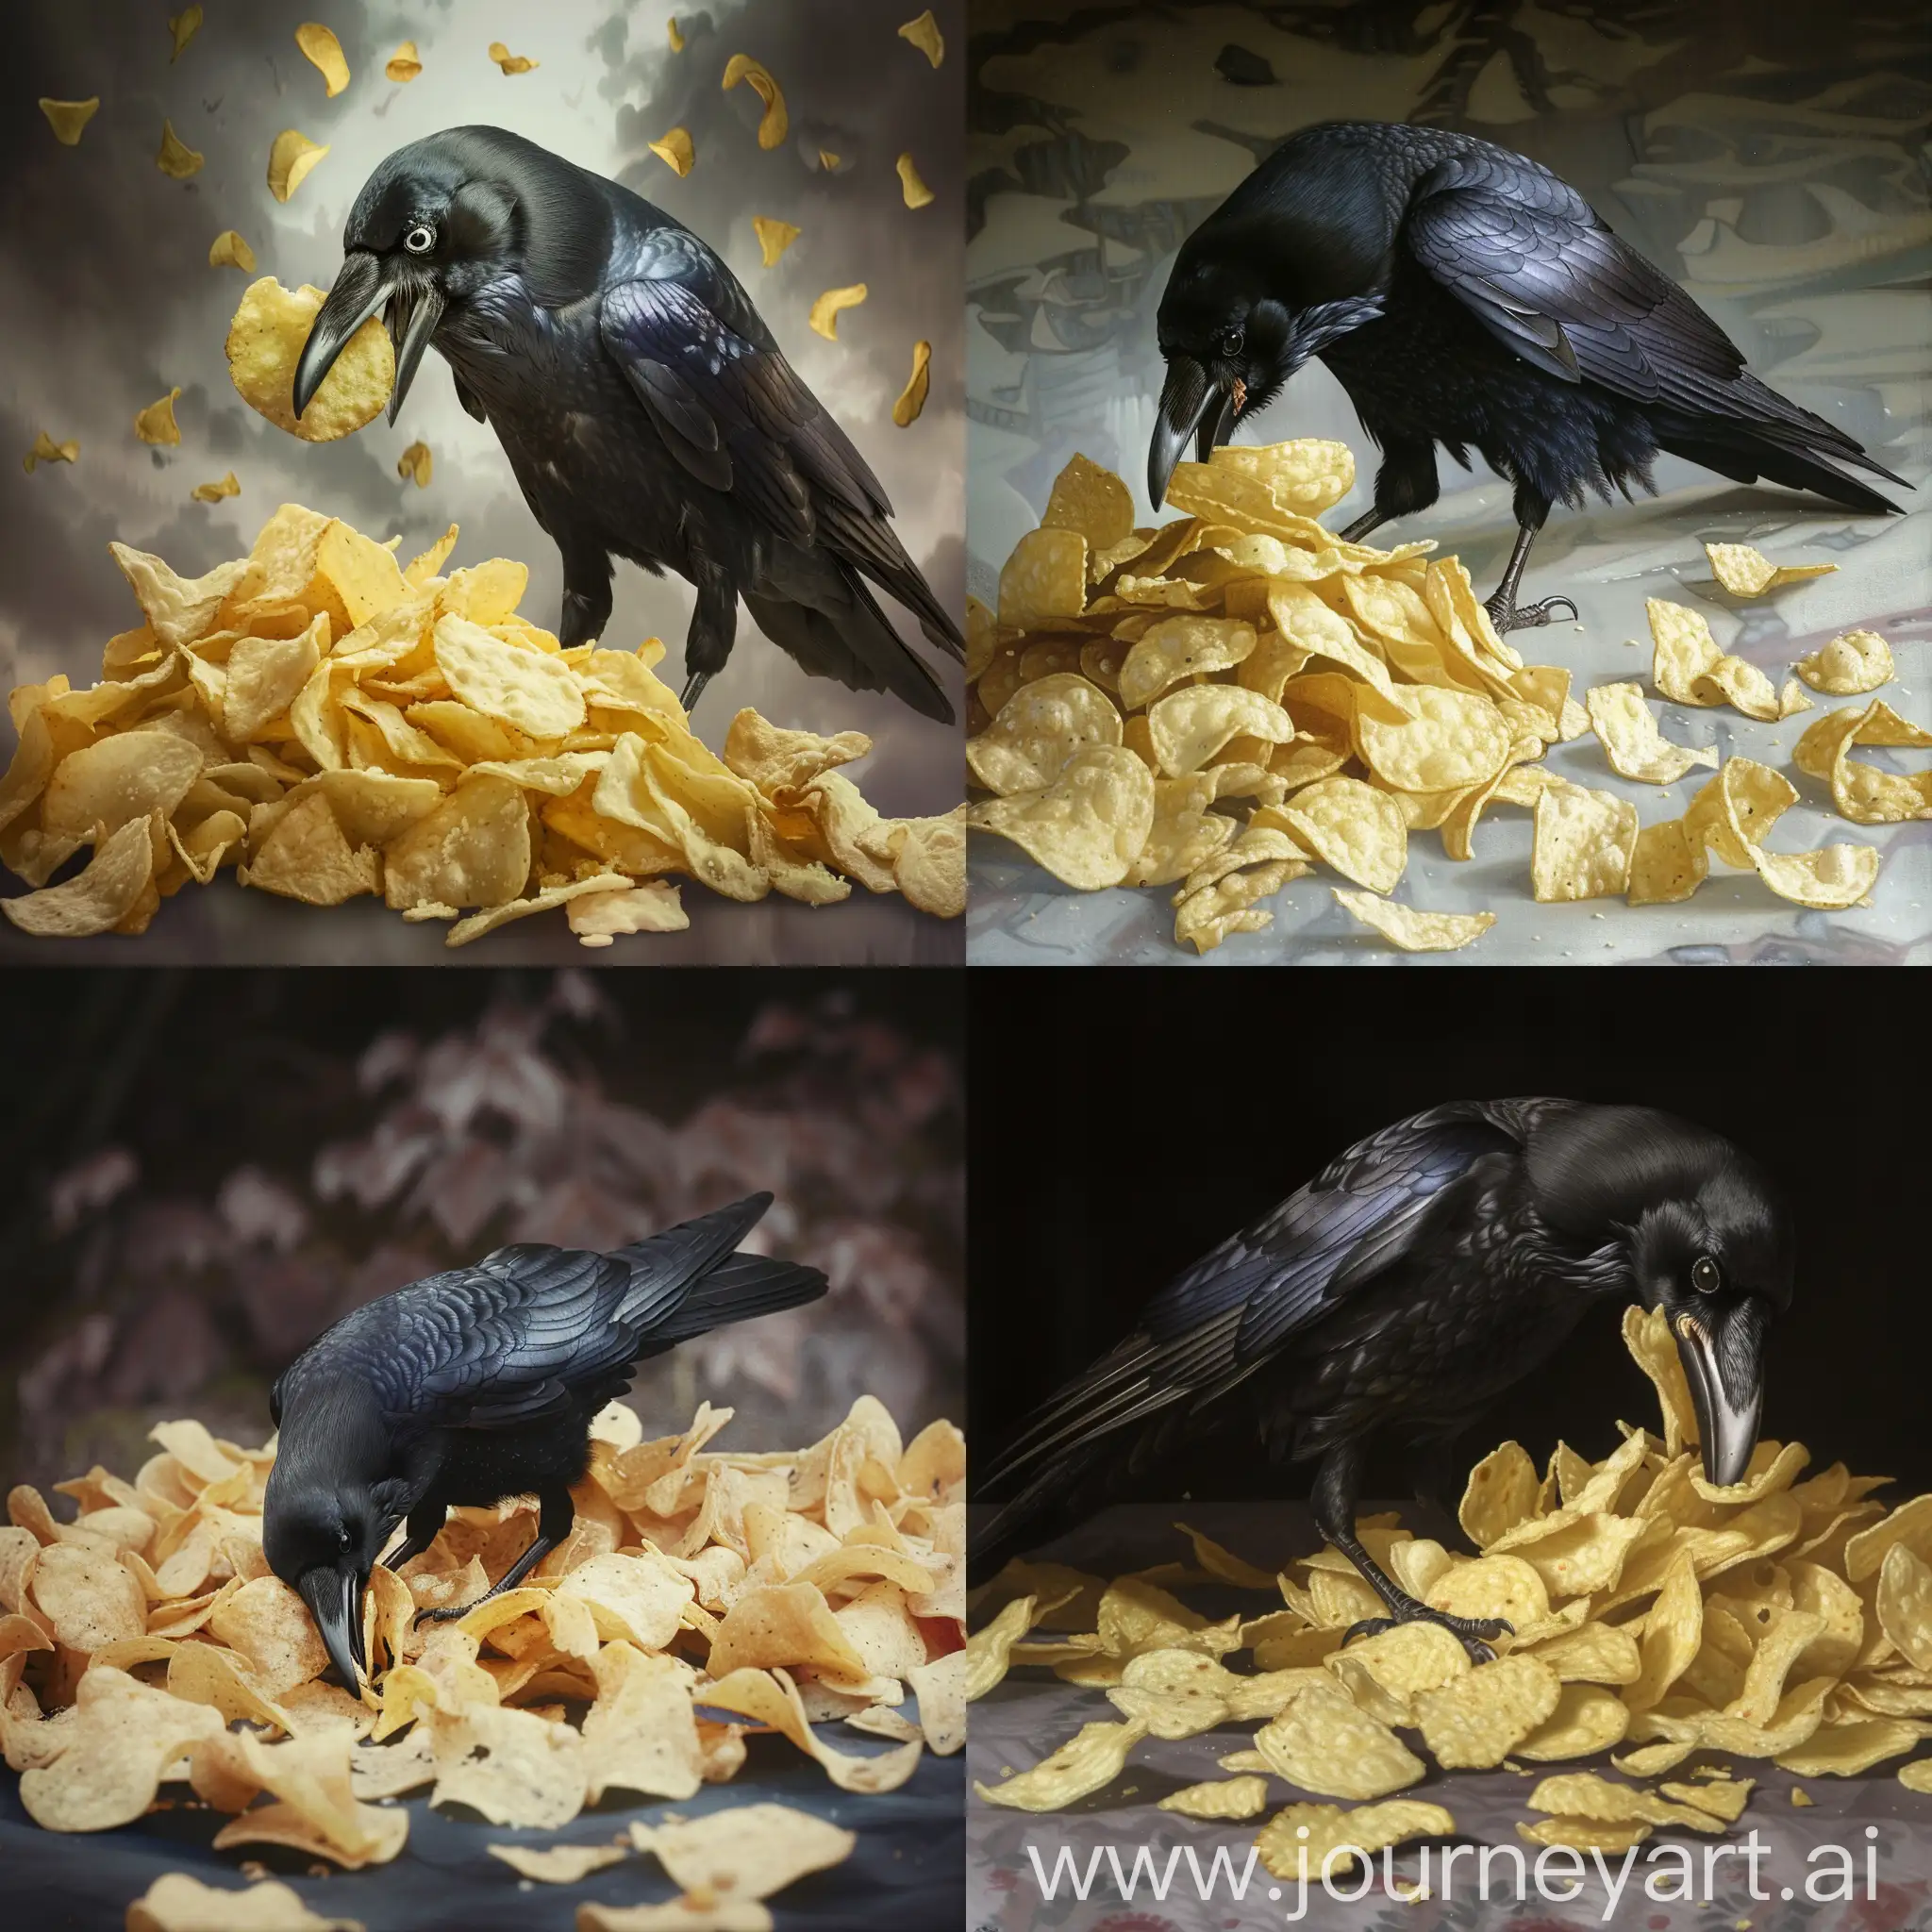 Crow-Feeding-on-Chips-in-Urban-Environment